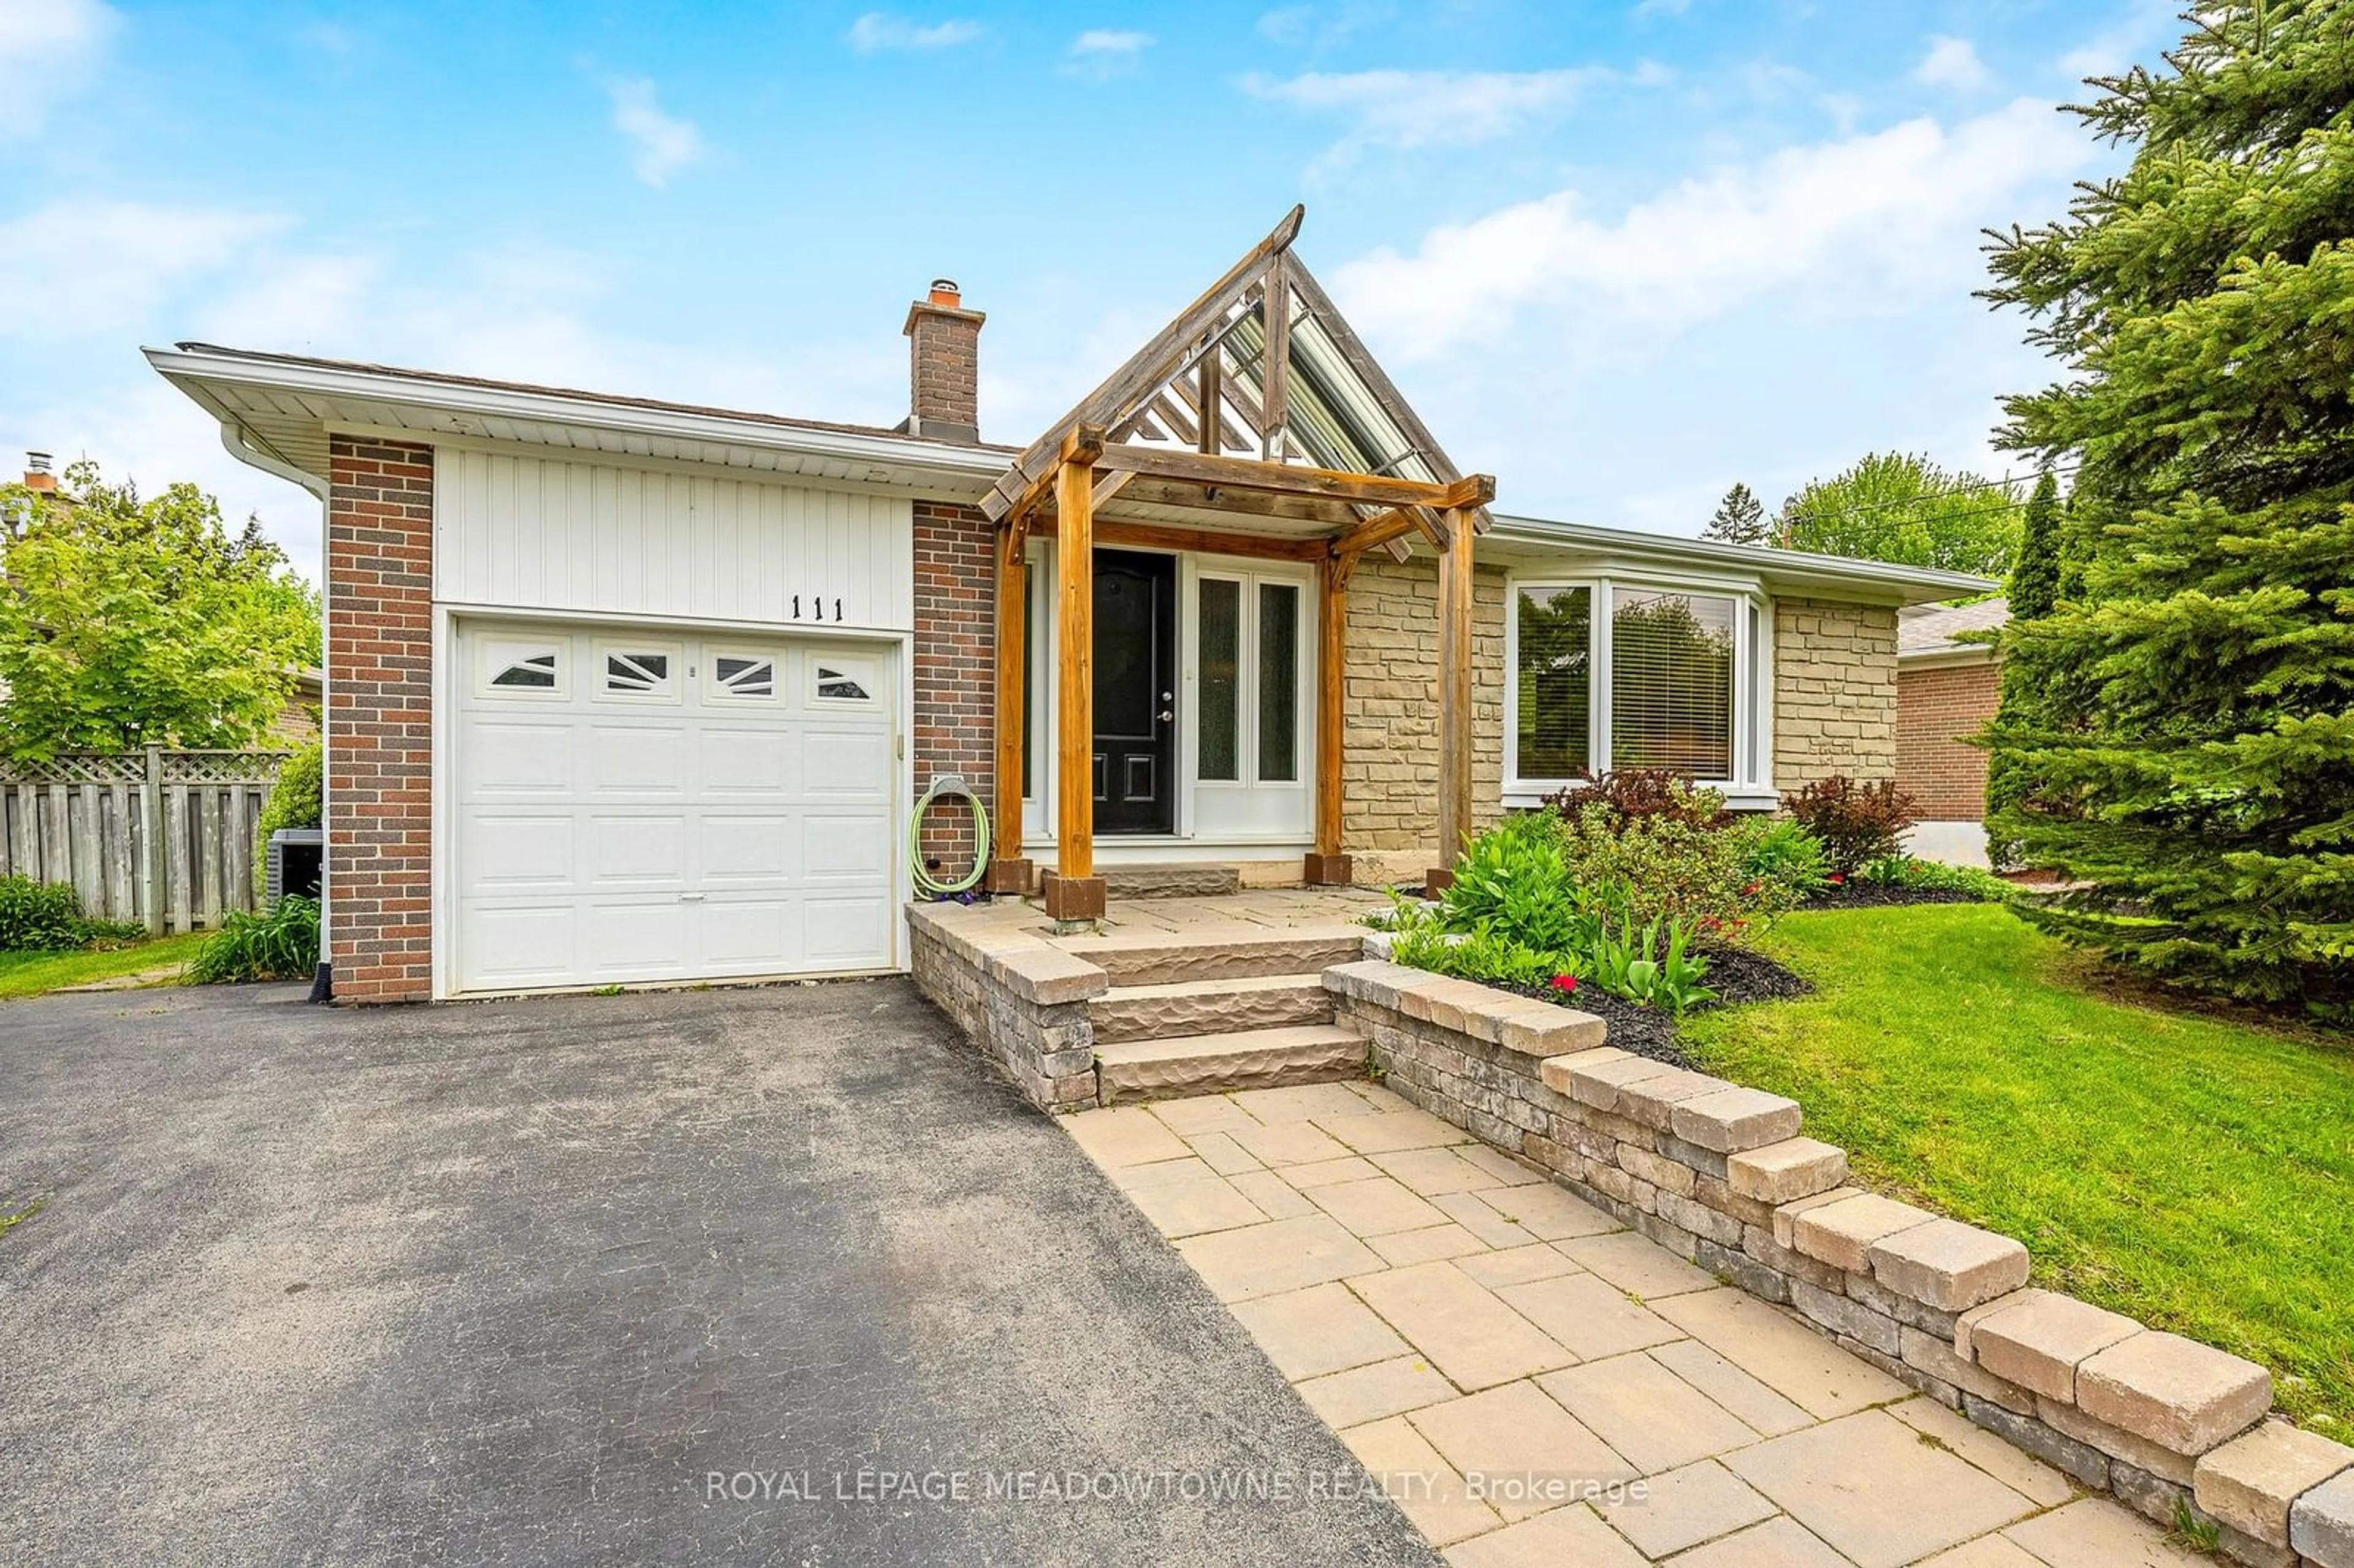 Home with brick exterior material for 111 Rexway Dr, Halton Hills Ontario L7G 1R3